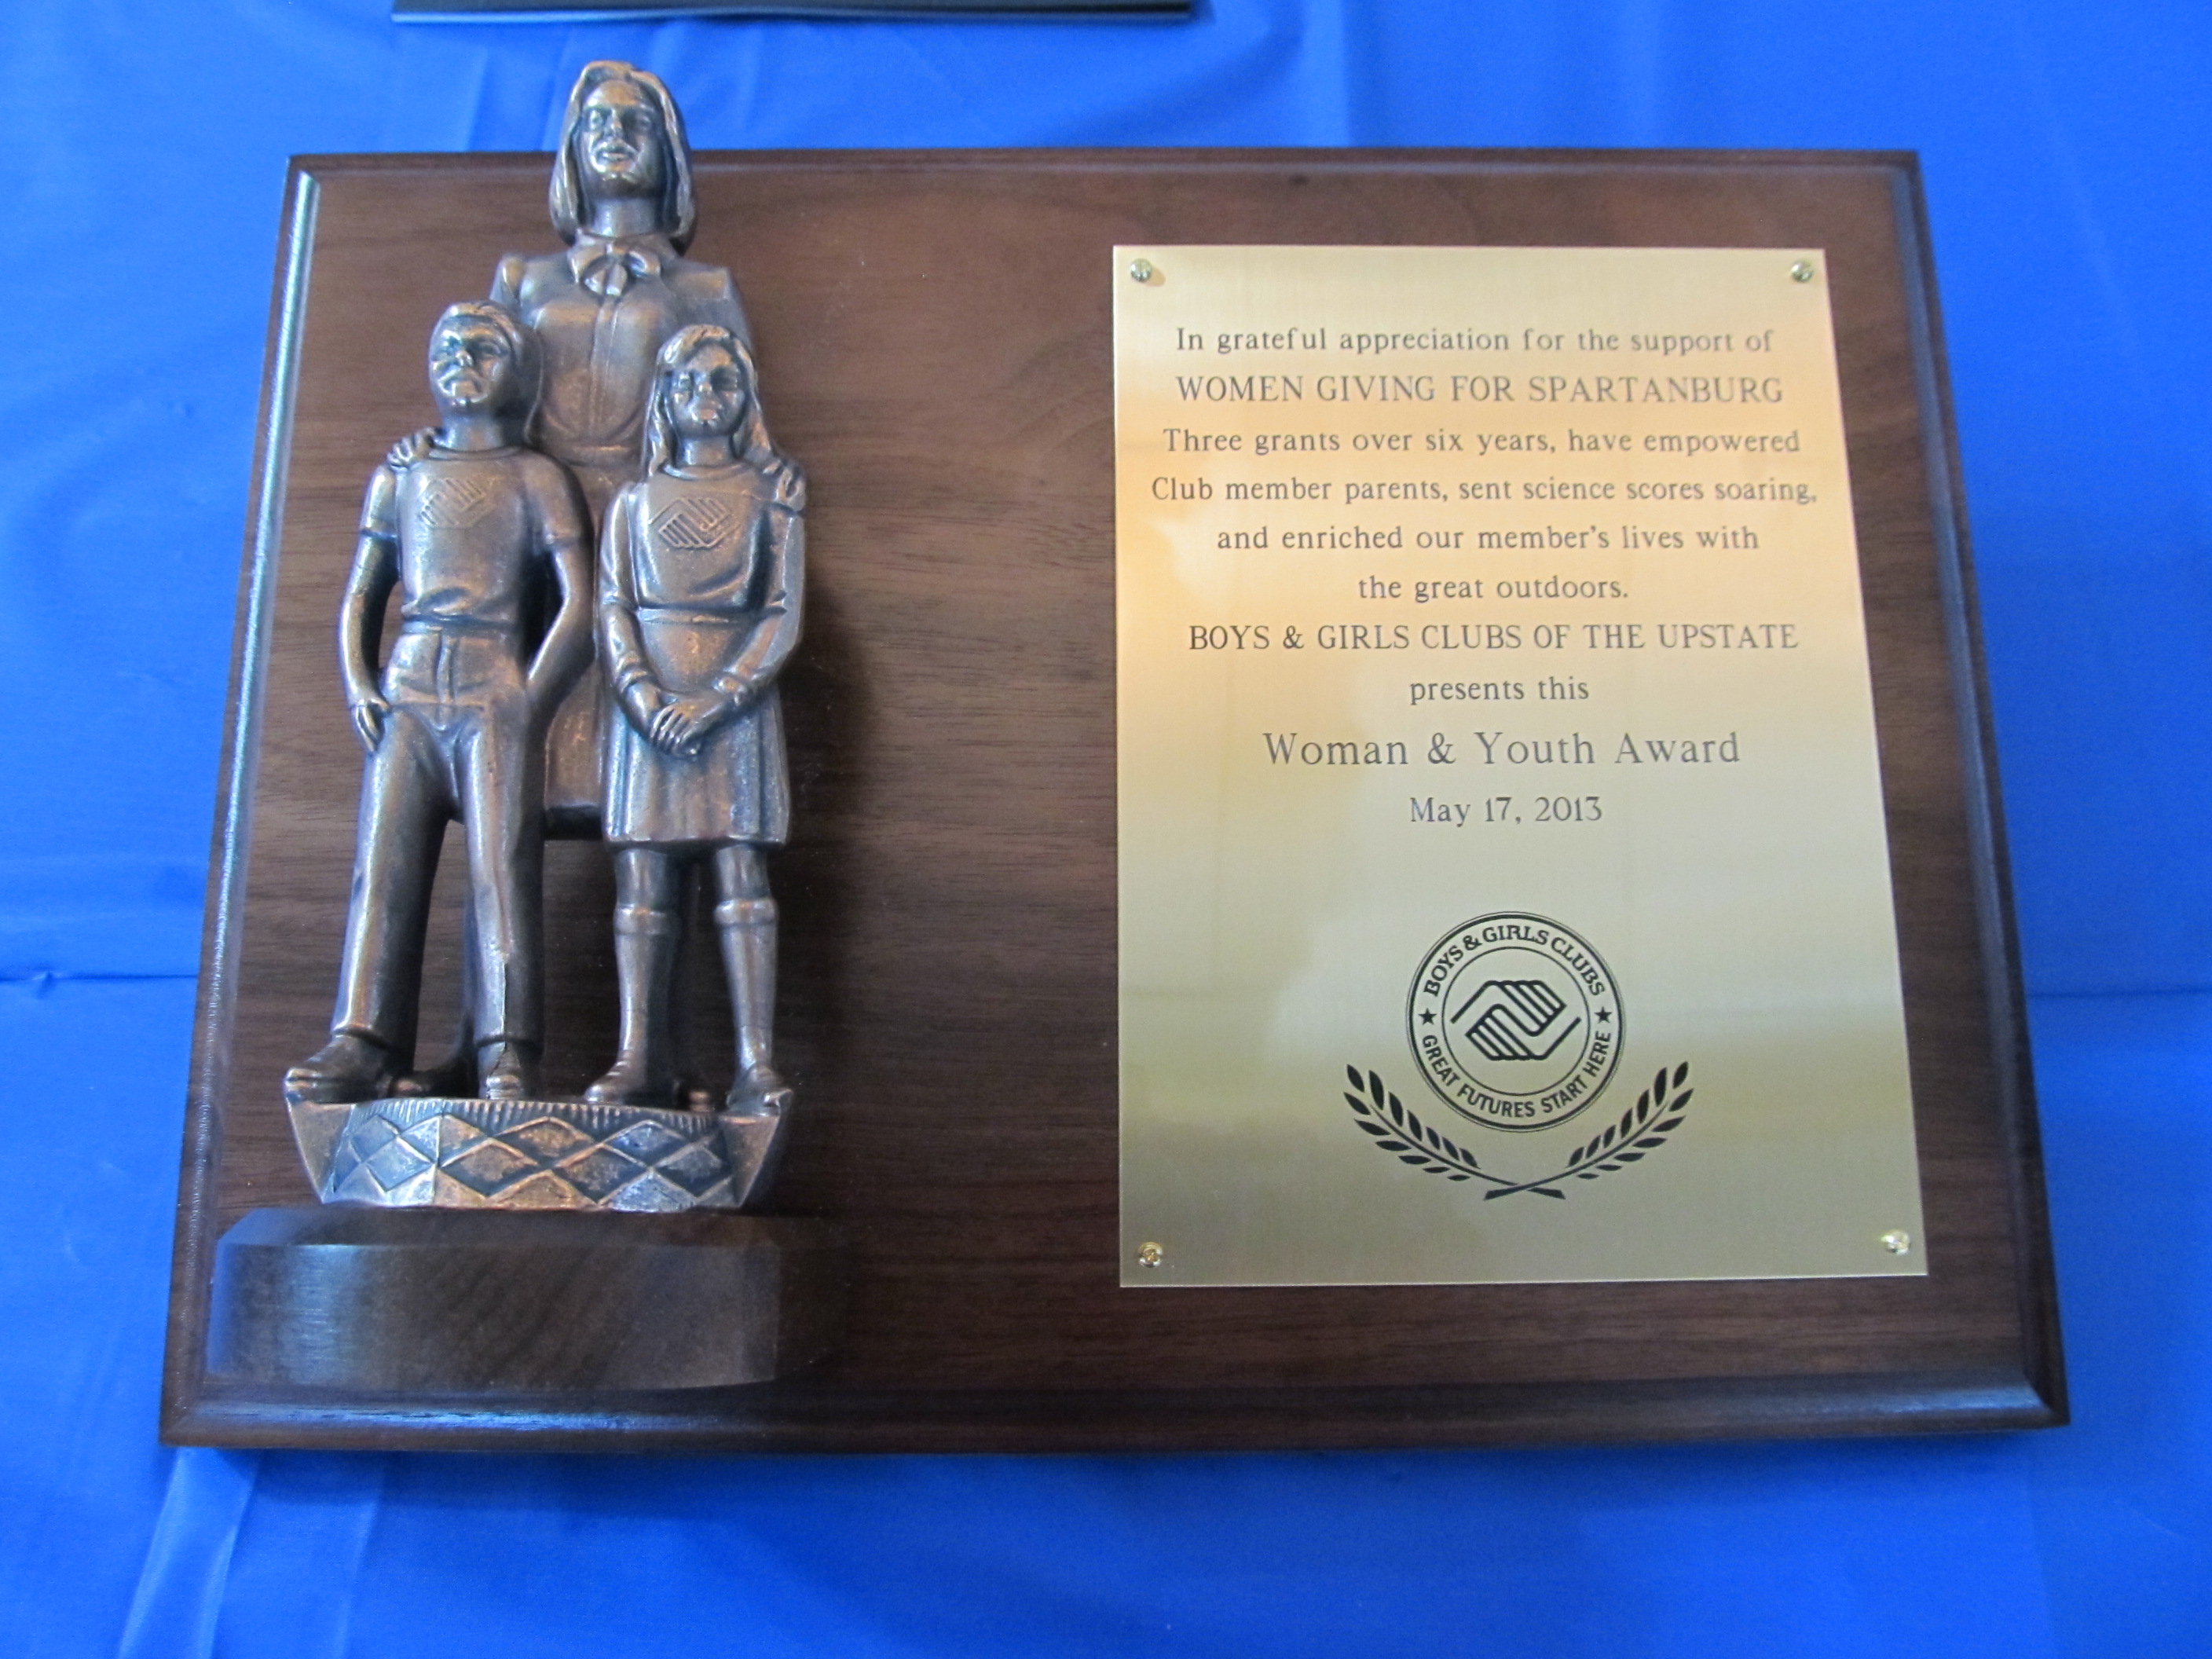 WGFS Award Received from Boys & Girls Clubs 